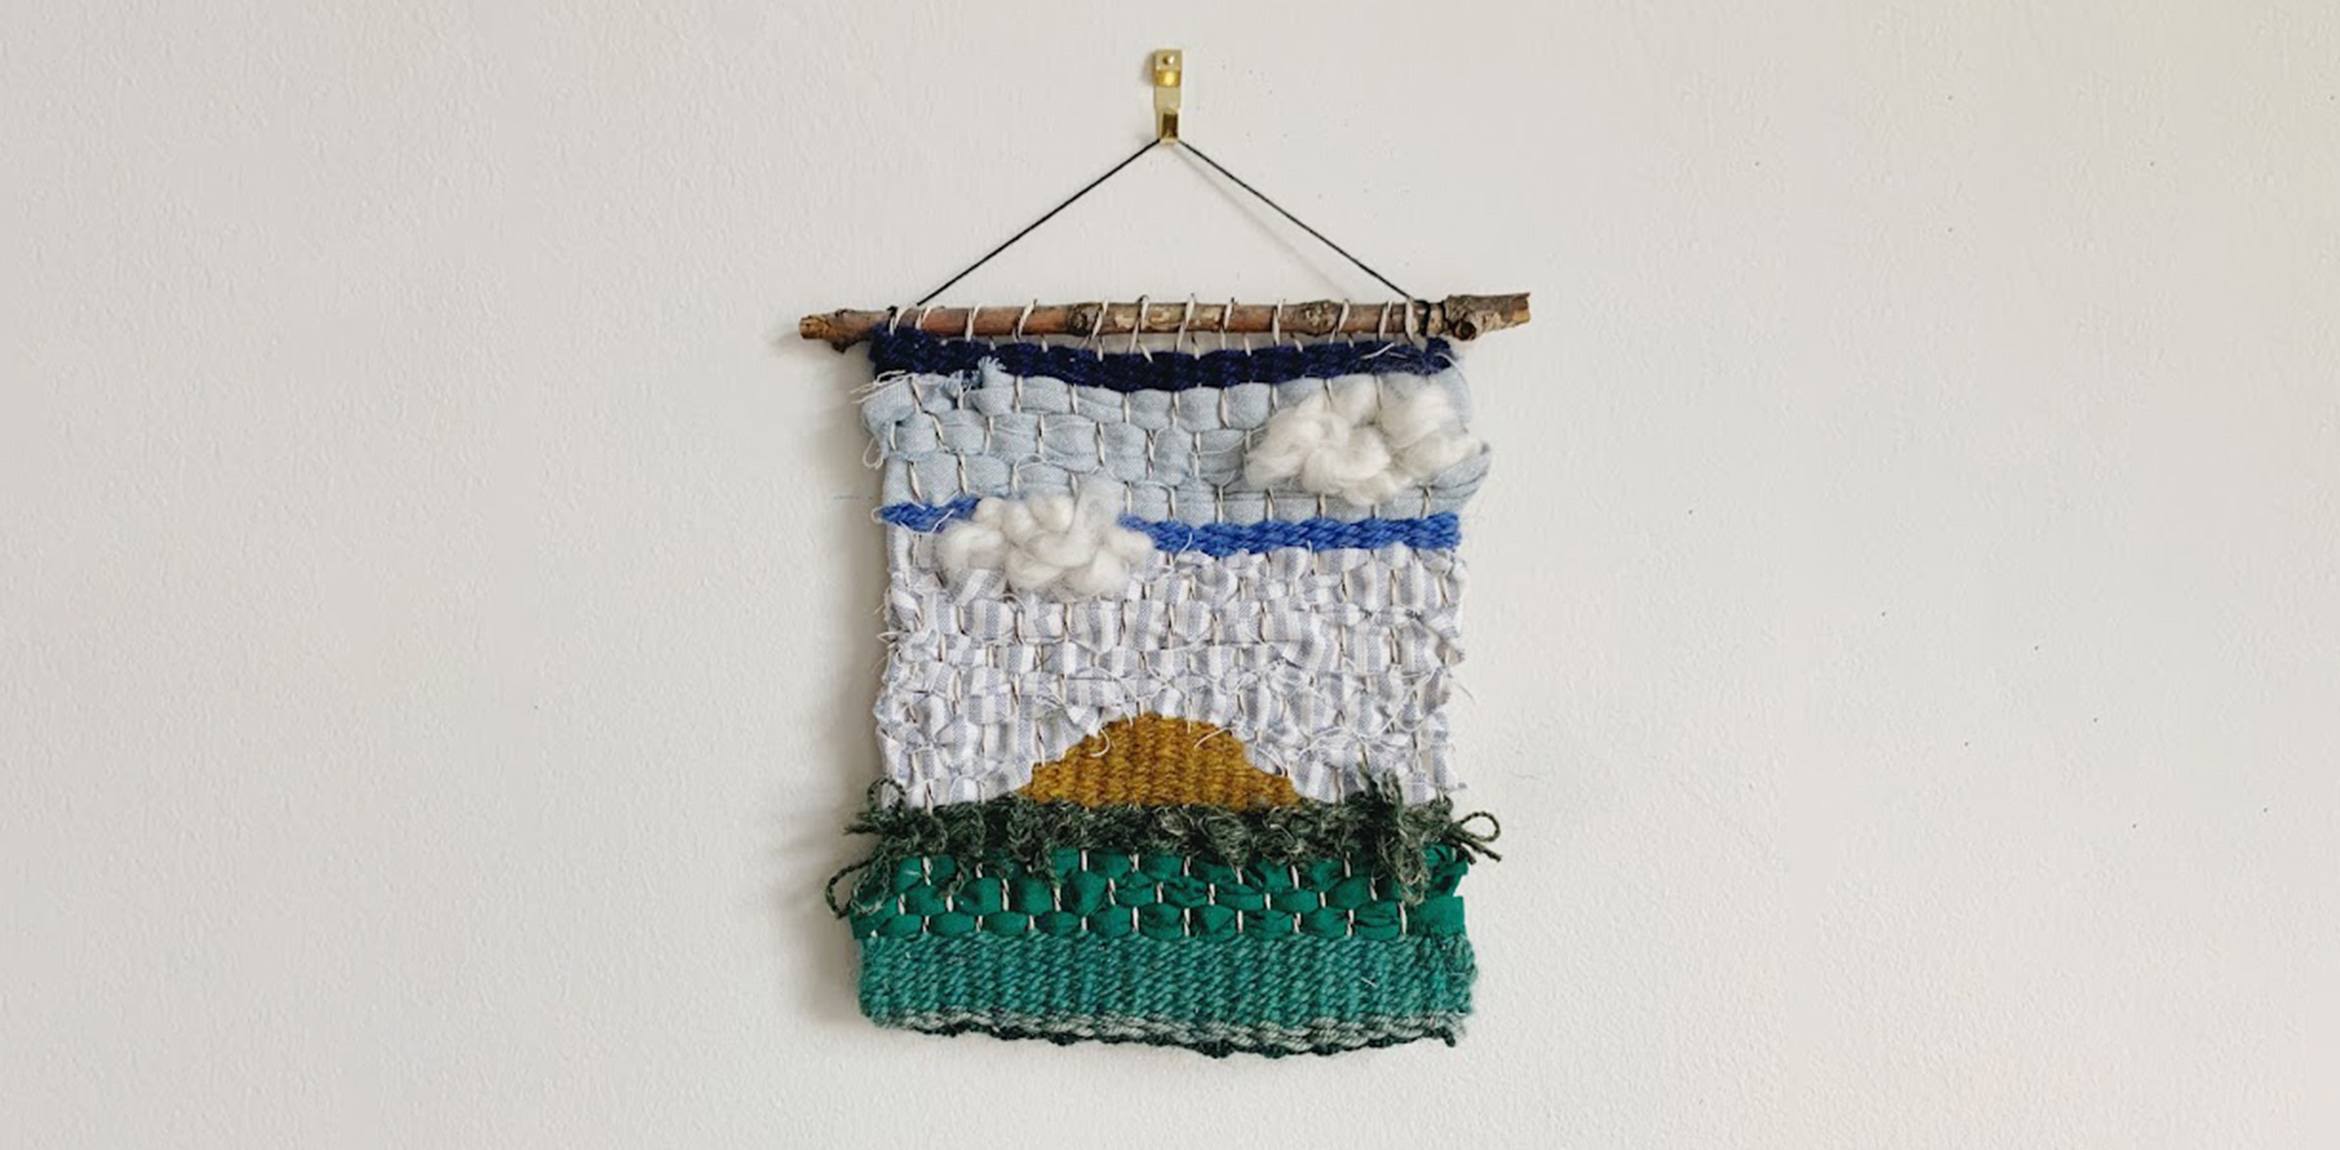 Woven piece of art using upcycled fabric and yarn scraps